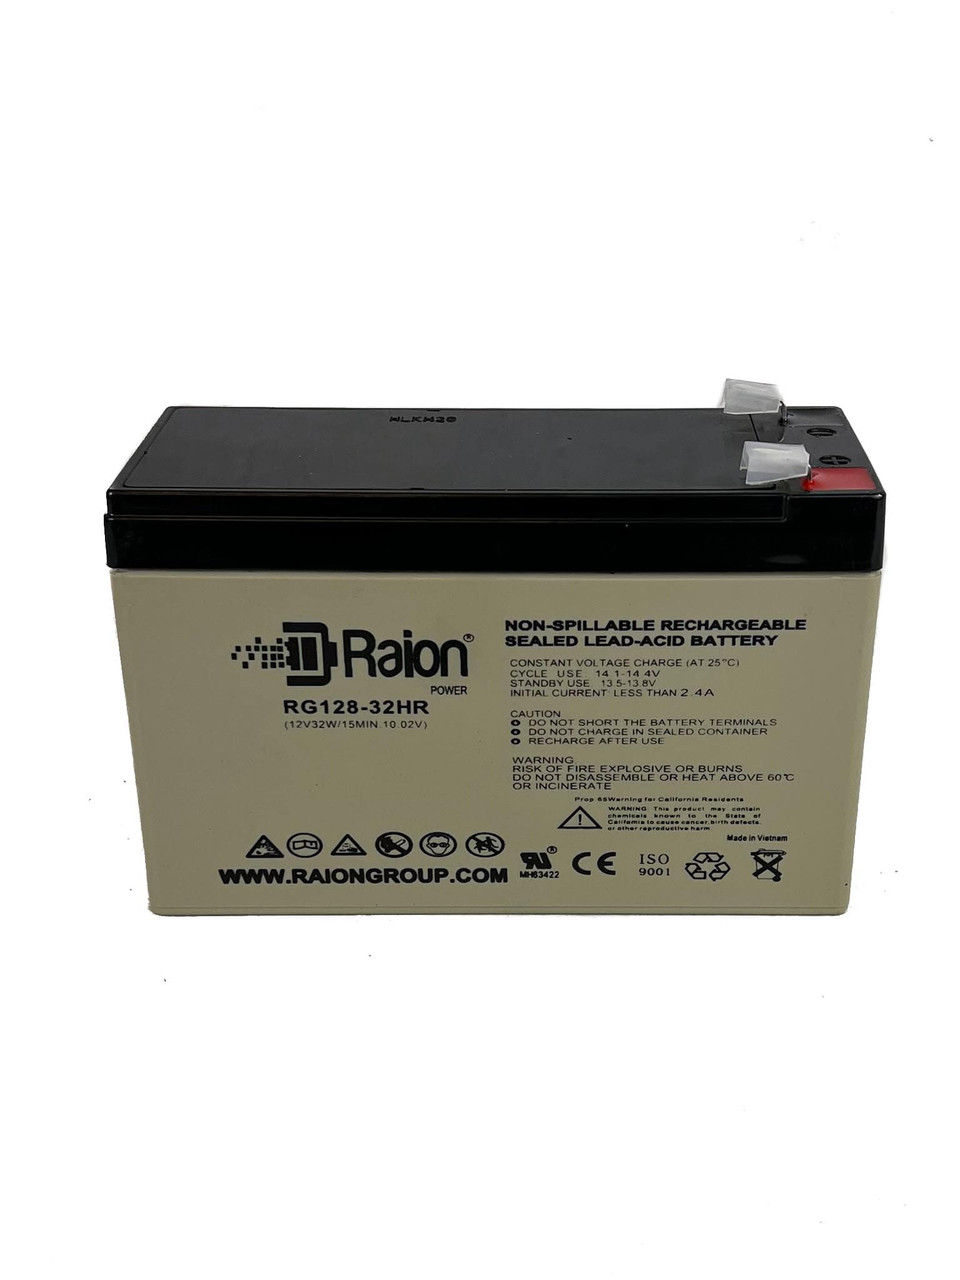 Raion Power RG128-32HR Replacement High Rate Battery Cartridge for APC Back-UPS 575VA BX575U-LM